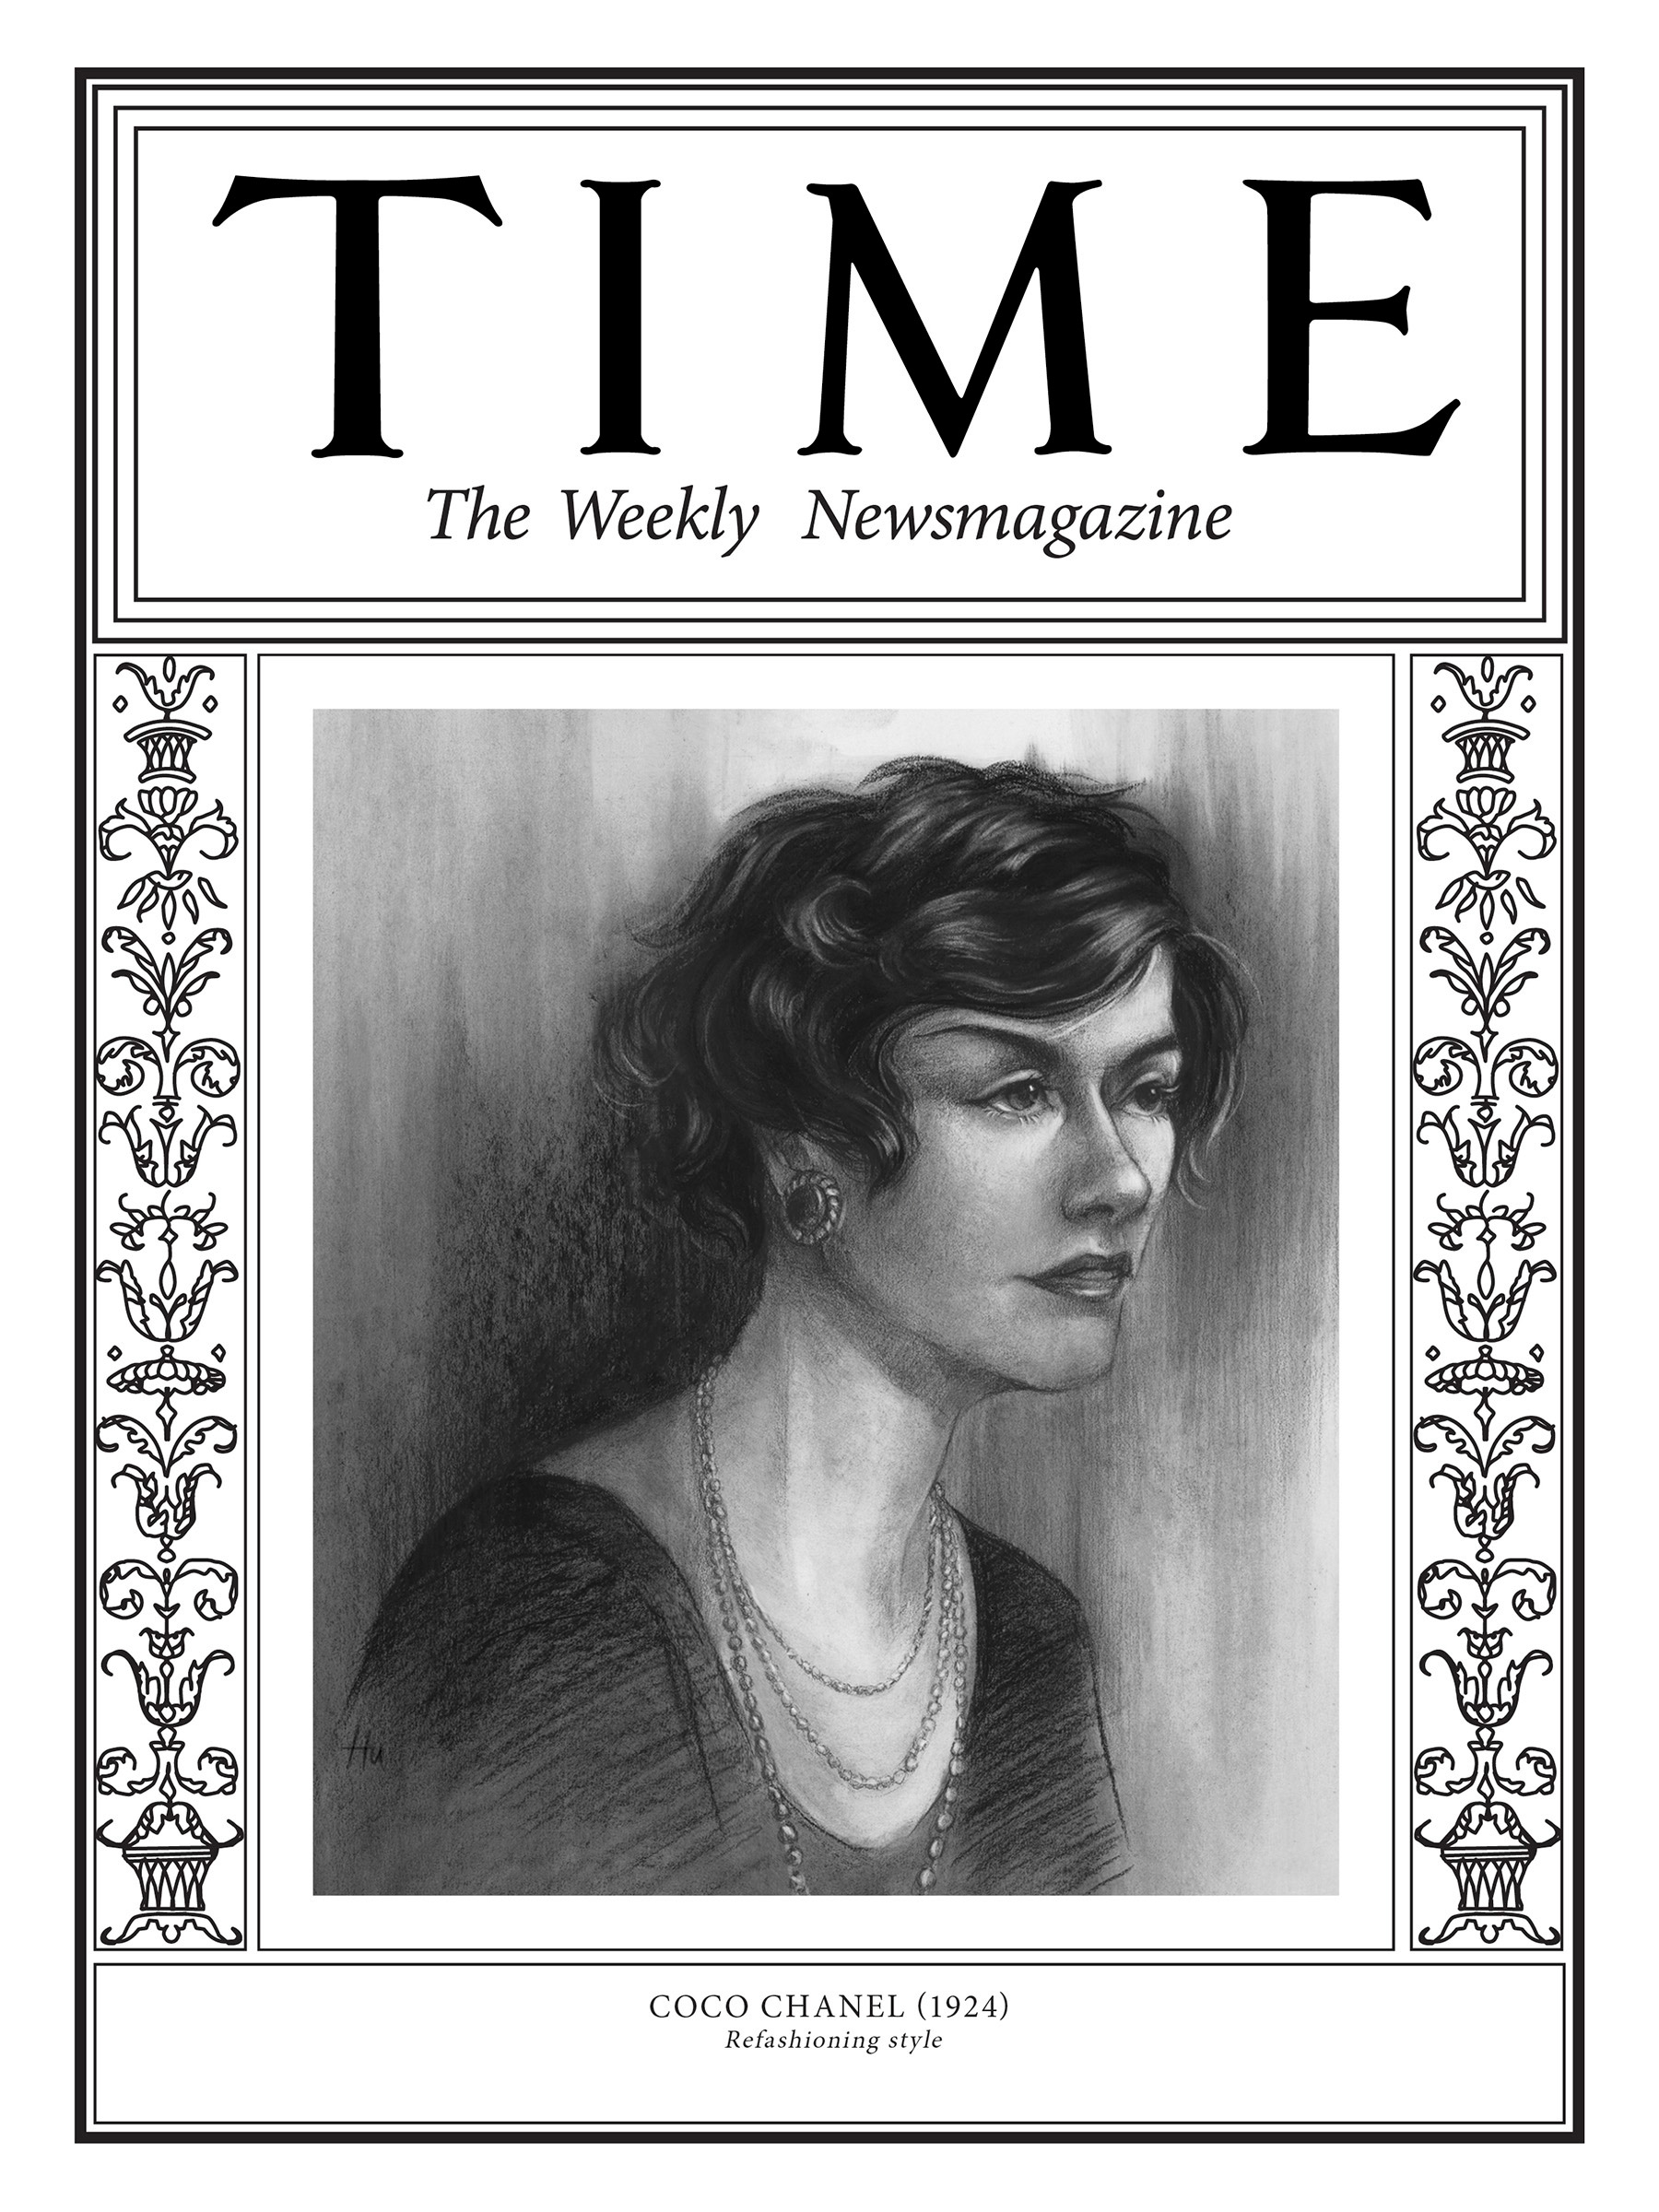 <a href="https://fineartamerica.com/featured/coco-chanel-1924-time.html"><strong>Buy the cover art→</strong></a> (Illustration by Kelly Hu for TIME; Heritage Images/Getty)